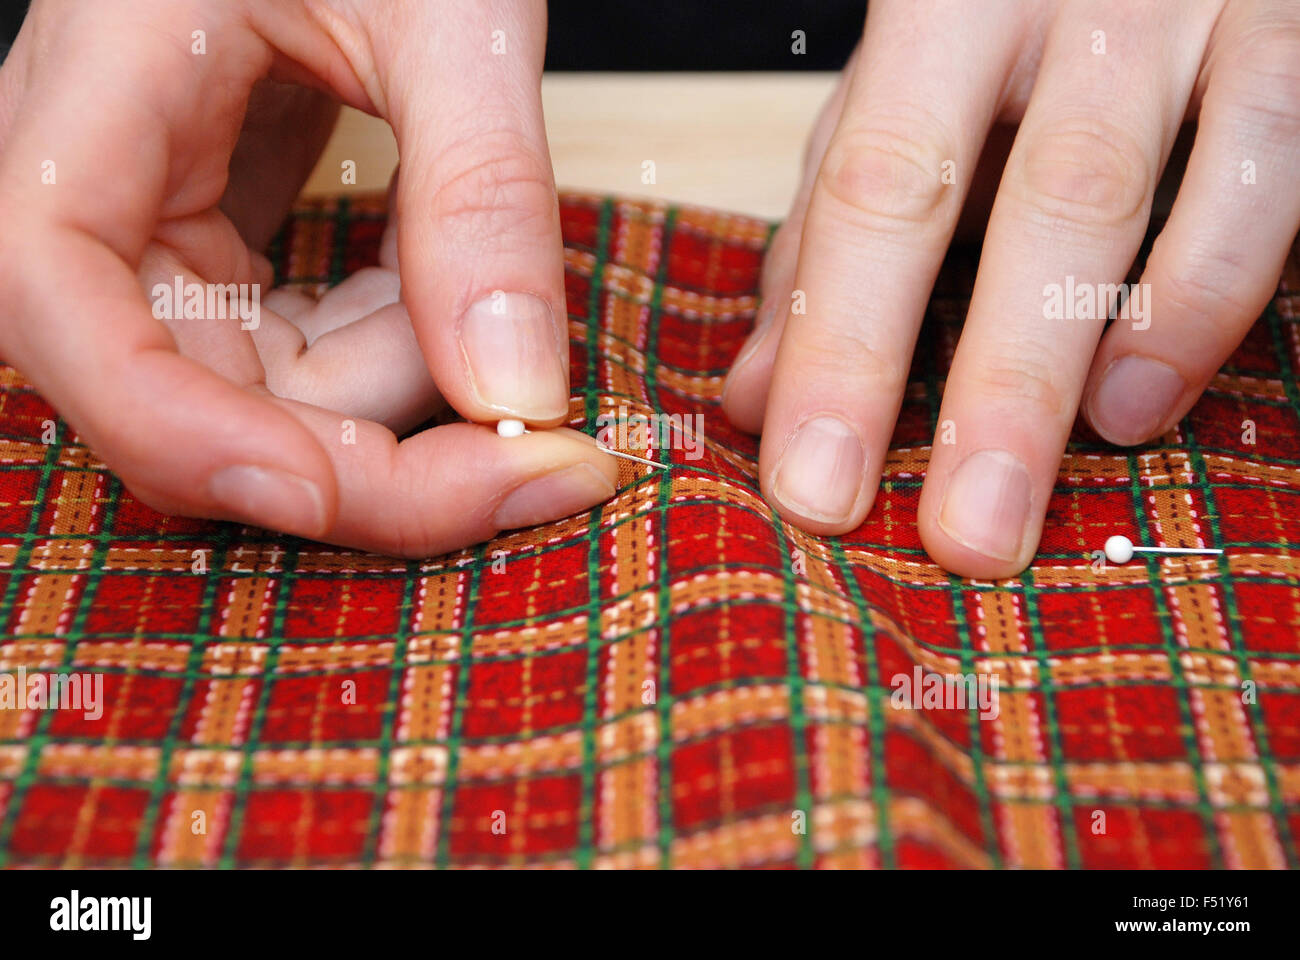 Closeup of two hands sticking pins into festive red plaid fabric Stock Photo